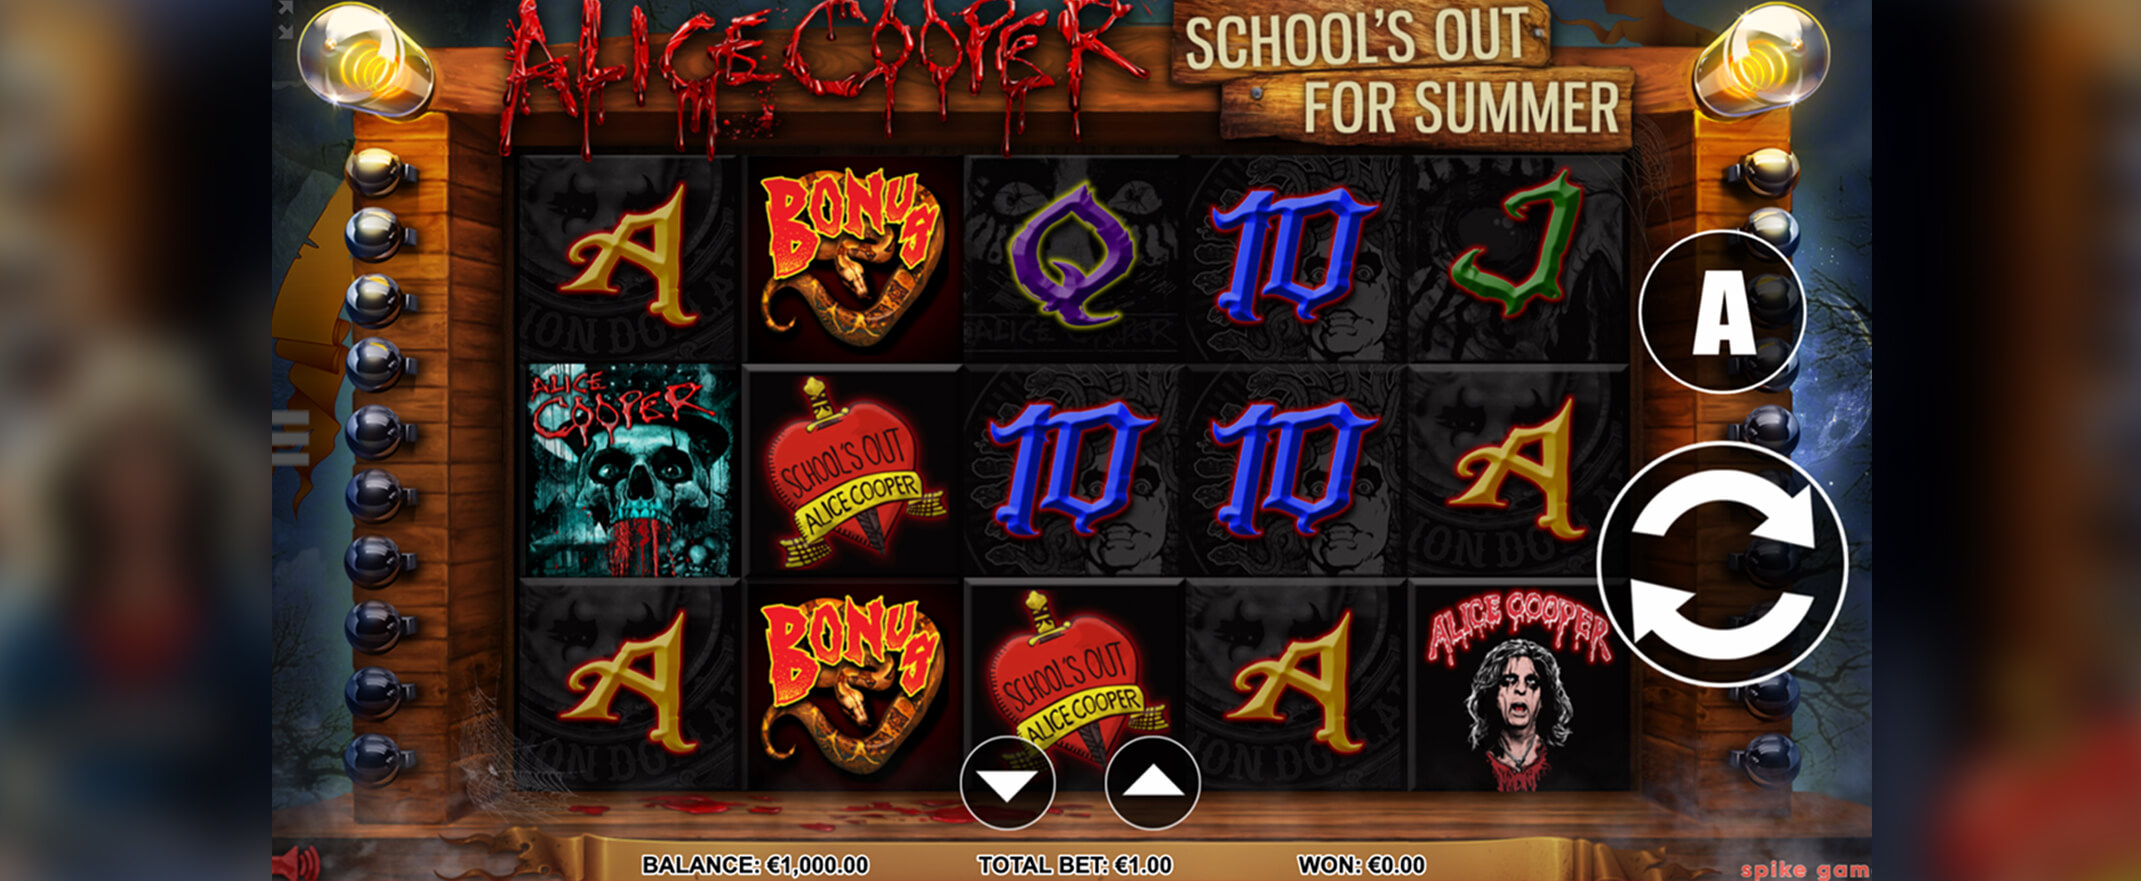 Alice Cooper School’s Out for Summer by Spike Games & Leander